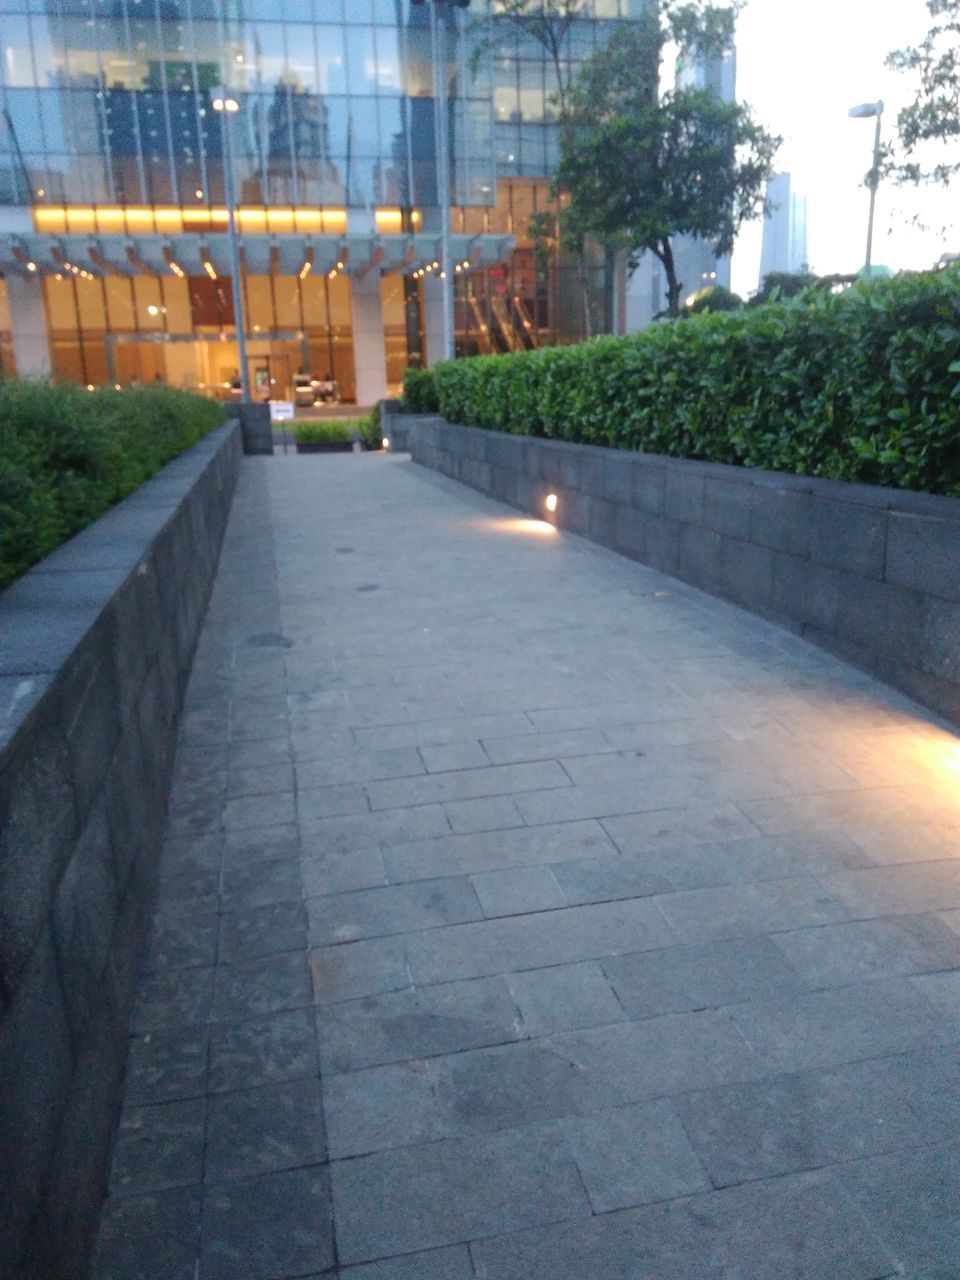 FOOTPATH BY BUILDING IN CITY